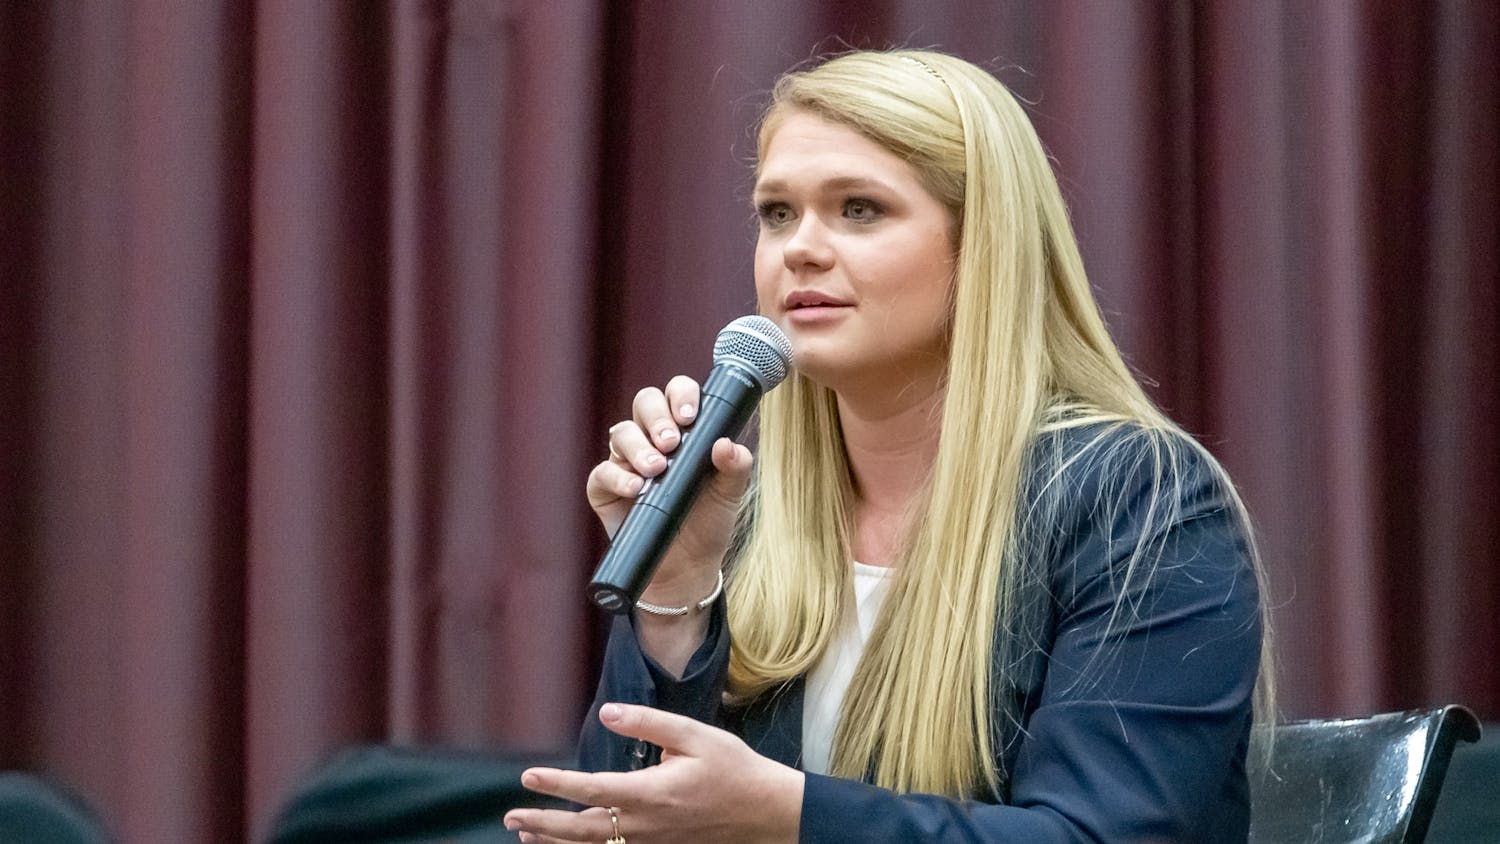 Student Body President candidate Reedy Newton speaks during the student government debate on Feb. 15, 2022 in the Russell House Ballroom in Columbia, SC.